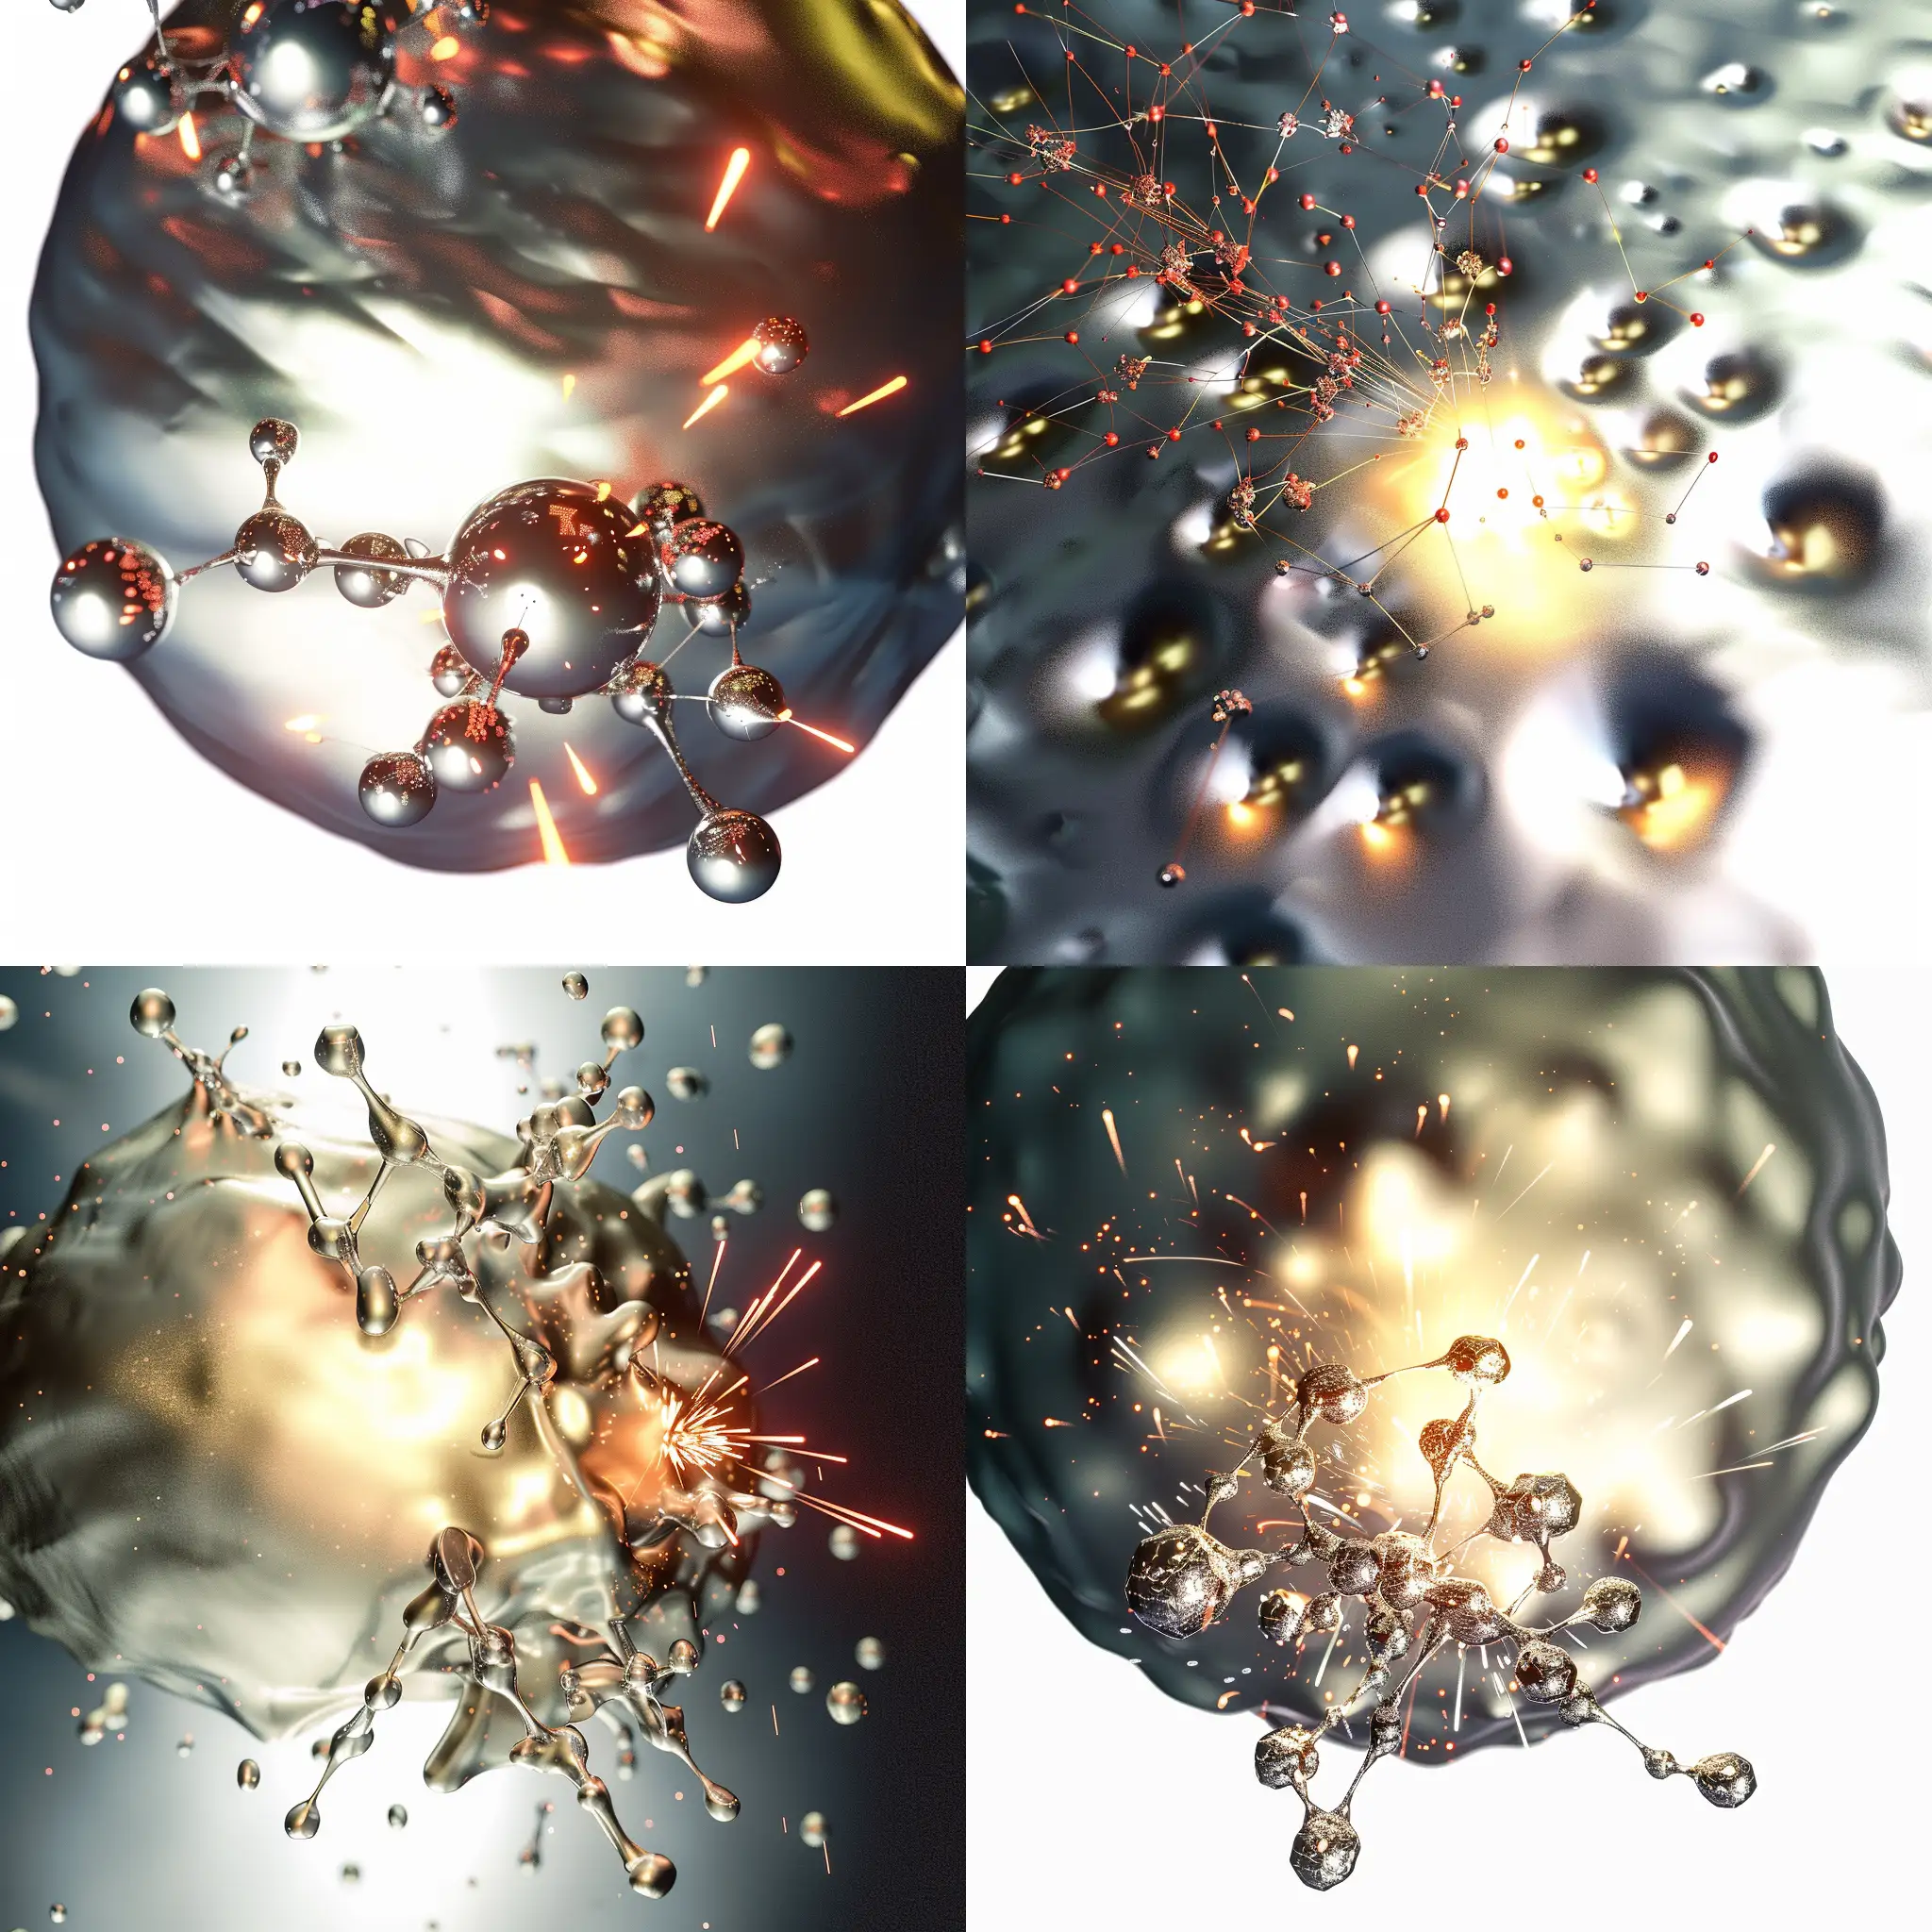 Futuristic-Liquid-Metal-Texture-with-Energy-Sparks-and-Cosmic-Background